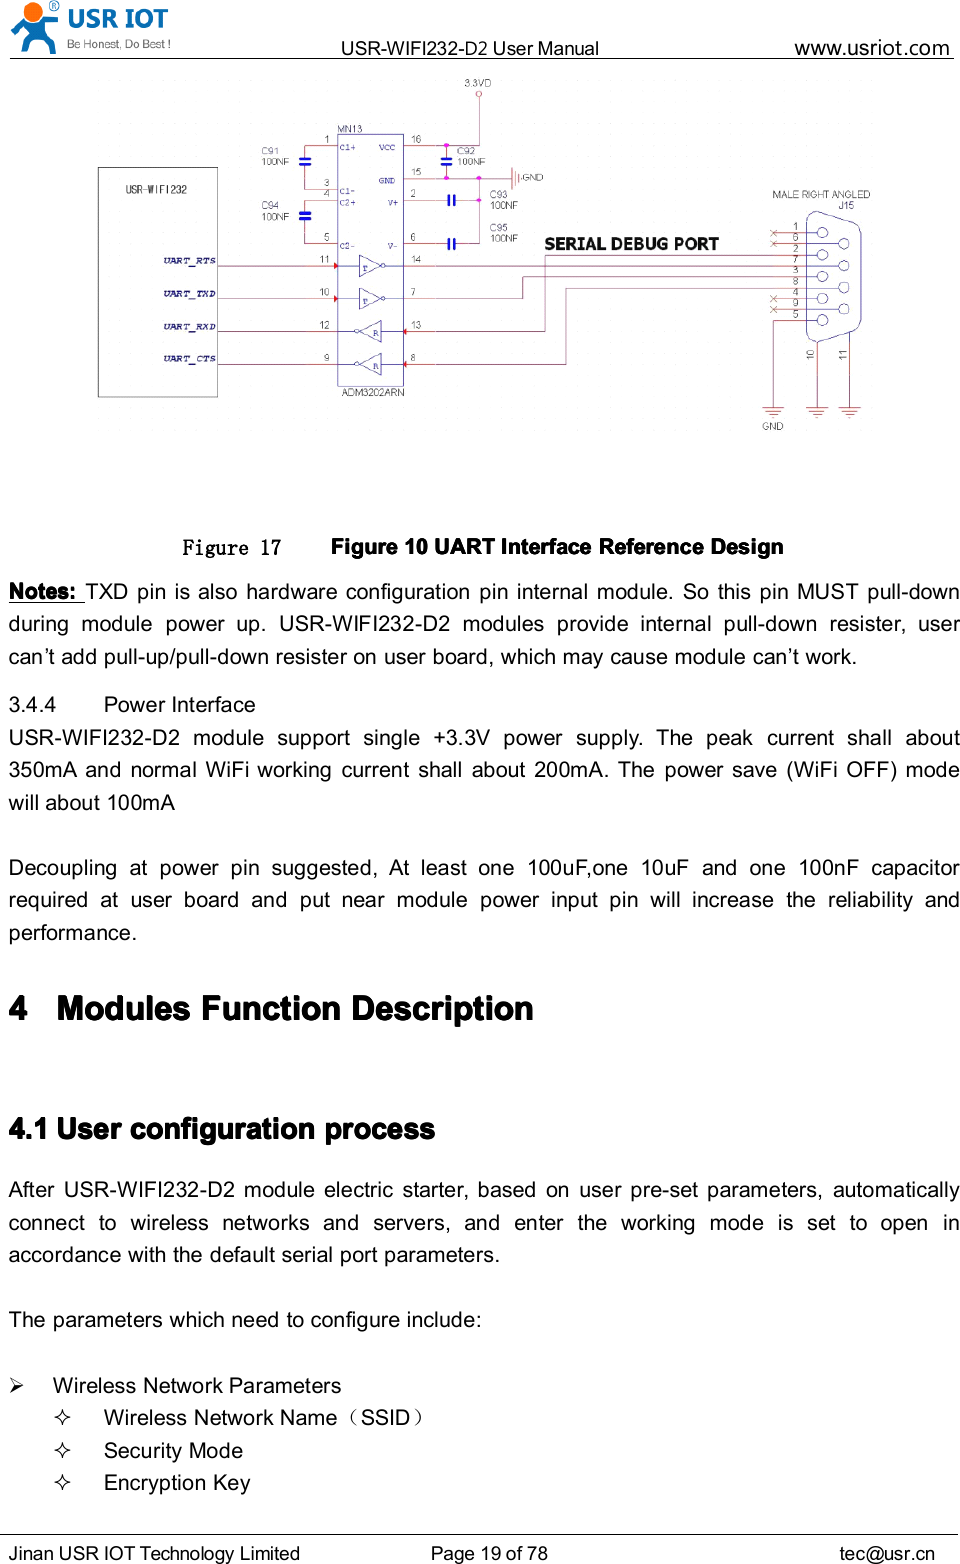 USR-WIFI232- D2 User Manual www.usr iot .comJinan USR IOT Technology Limited Page 19 of 78 tec@usr.cnFigure 17 FigureFigureFigureFigure 10101010 UARTUARTUARTUART InterfaceInterfaceInterfaceInterface ReferenceReferenceReferenceReference DesignDesignDesignDesignNotes:Notes:Notes:Notes: TXD pin is also hardware configuration pin internal module. So this pin MUST pull-downduring module power up. USR-WIFI232-D2 modules provide internal pull-down resister, usercan ’ t add pull-up/pull-down resister on user board, which may cause module can ’ t work.3.4.4 Power InterfaceUSR-WIFI232-D2 module support single +3.3V power supply. The peak current shall about350mA and normal WiFi working current shall about 200mA. The power save (WiFi OFF) modewill about 100mADecoupling at power pin suggested, At least one 100uF , one 10uF and one 10 0n F capacitorrequired at user board and put near module power input pin will increase the reliability andperformance.4444 ModulesModulesModulesModules FFFF unctionunctionunctionunction DDDD escriptionescriptionescriptionescription4.14.14.14.1 UserUserUserUser configurationconfigurationconfigurationconfiguration processprocessprocessprocessAfter USR-WIFI232-D2 module electric starter, based on user pre-set parameters, automaticallyconnect to wireless networks and servers, and enter the working mode is set to open inaccordance with the default serial port parameters.The parameters which need to configure include:Wireless Network ParametersWireless Network Name （SSID ）Security ModeEncryption Key